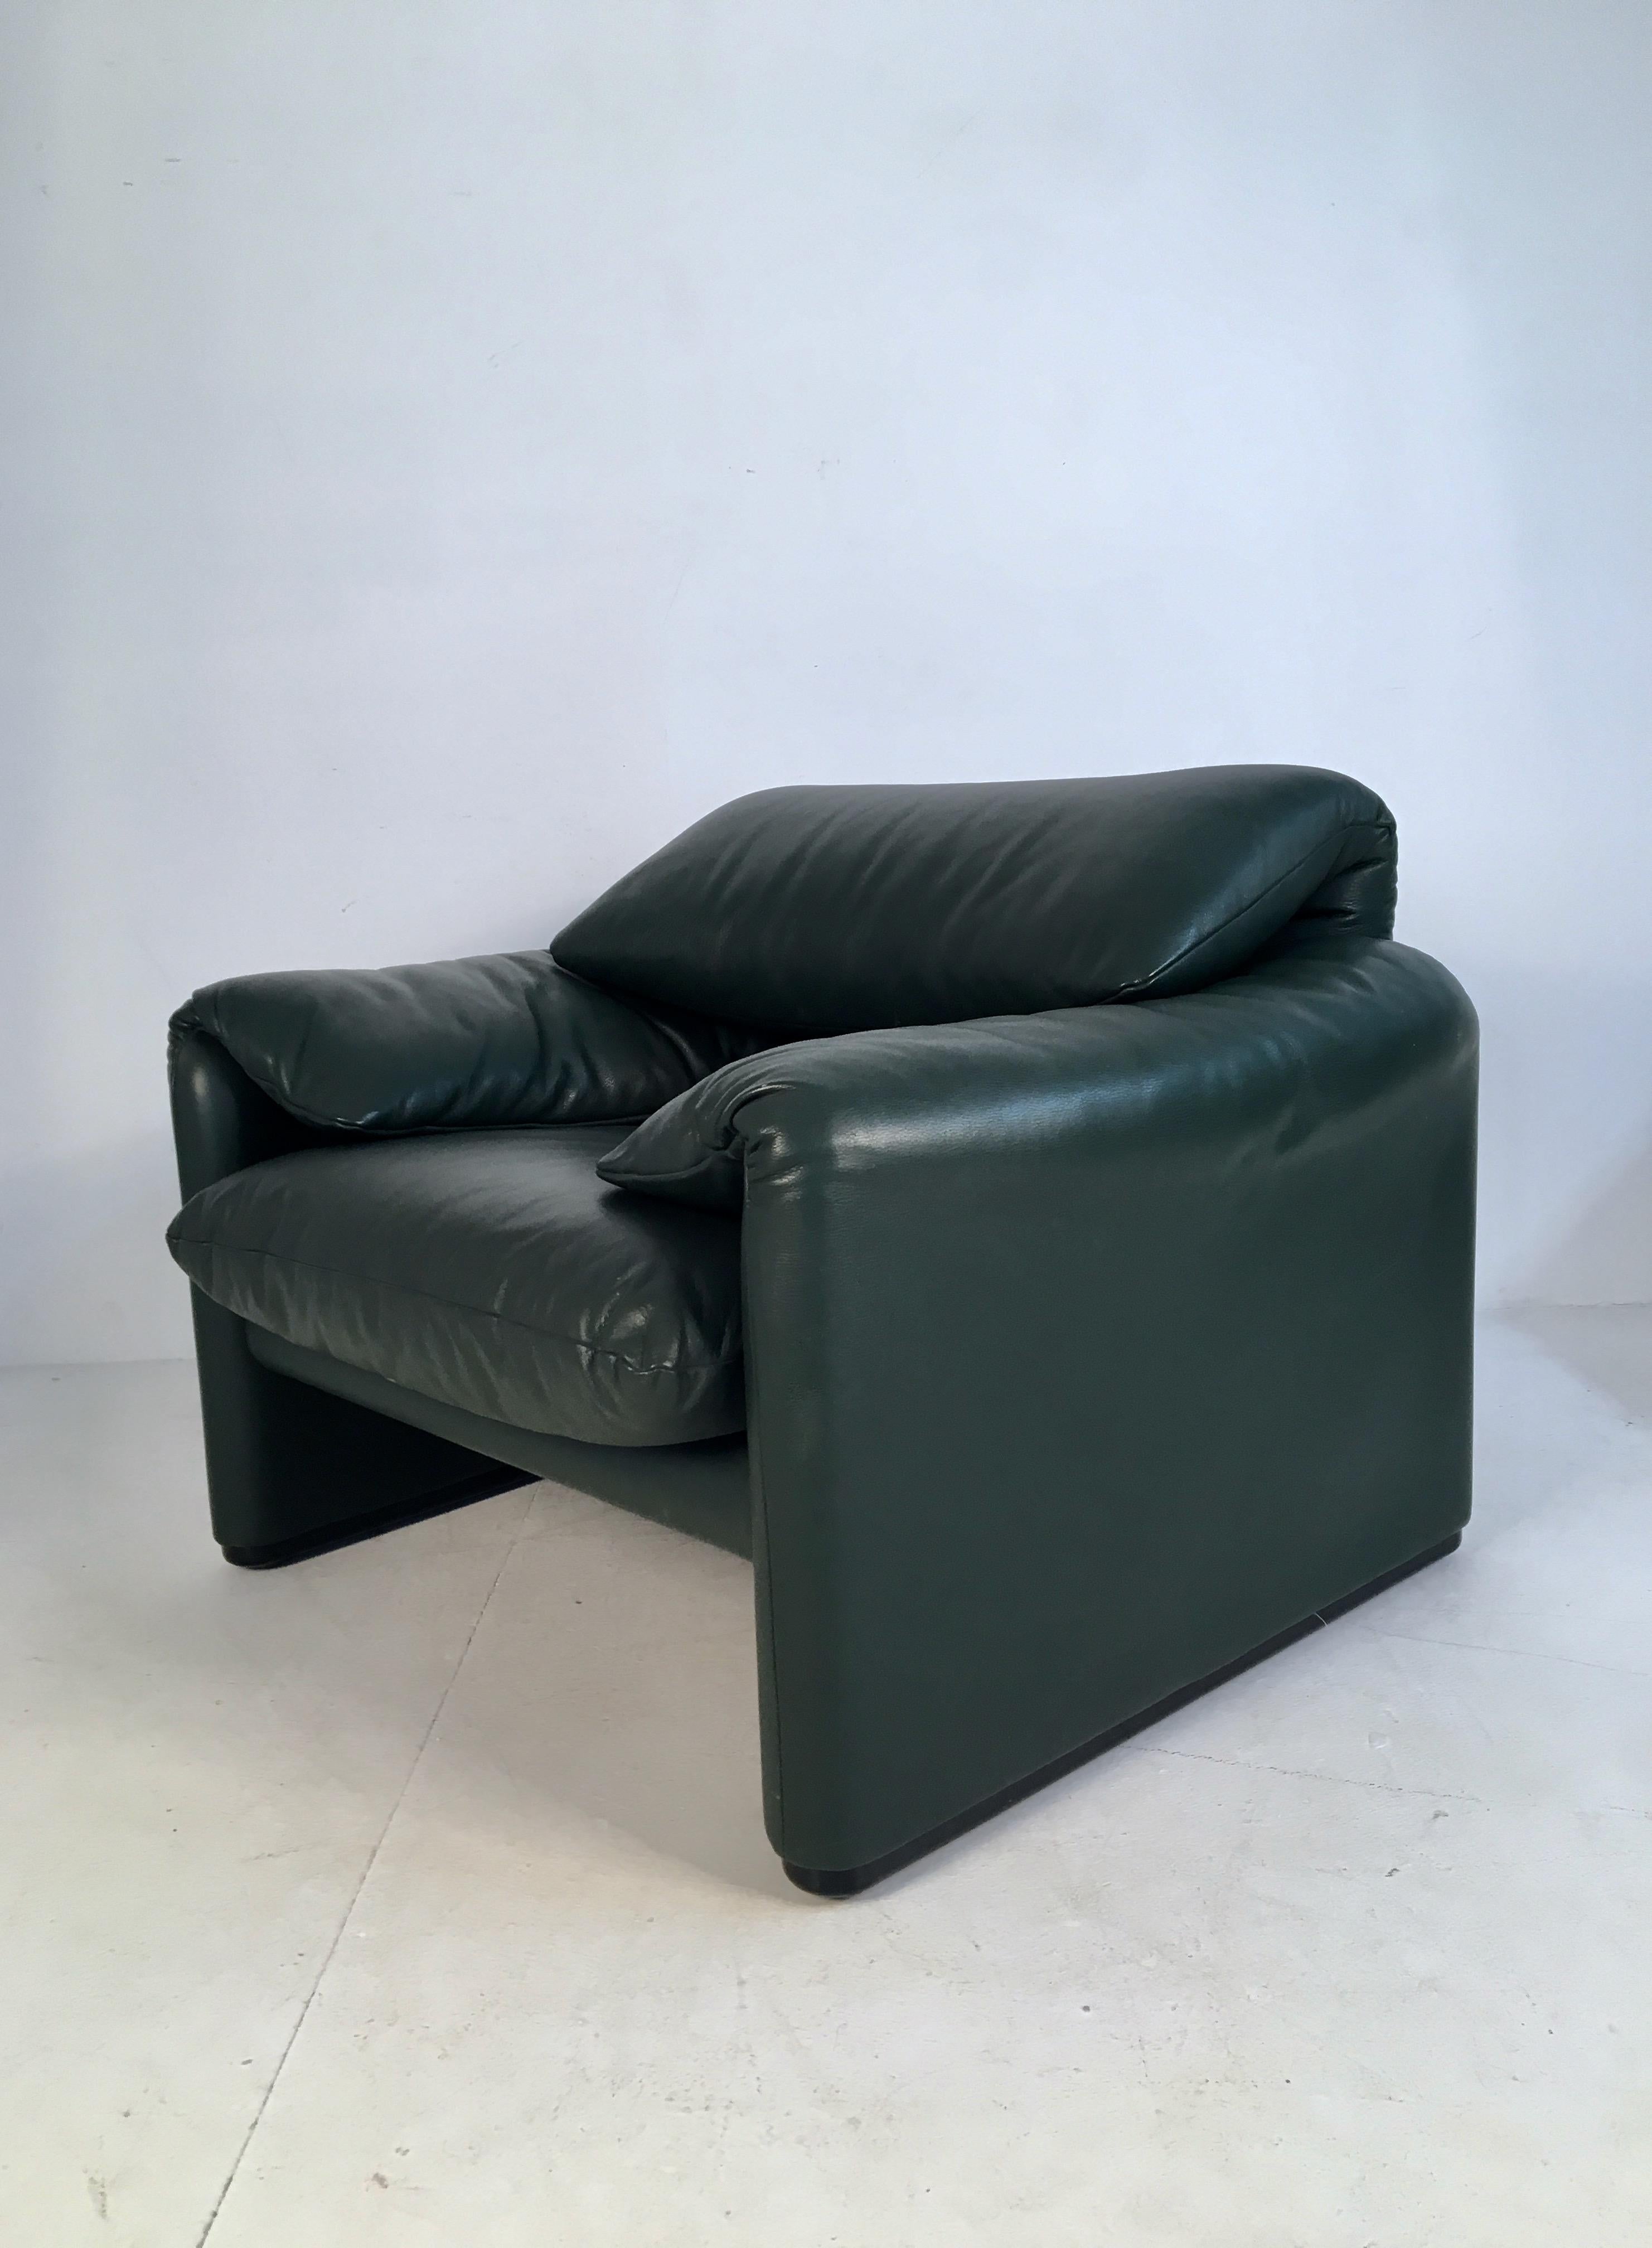 Pair of Green Leather 'Maralunga' Lounge Chairs by Magistretti for Cassina 1